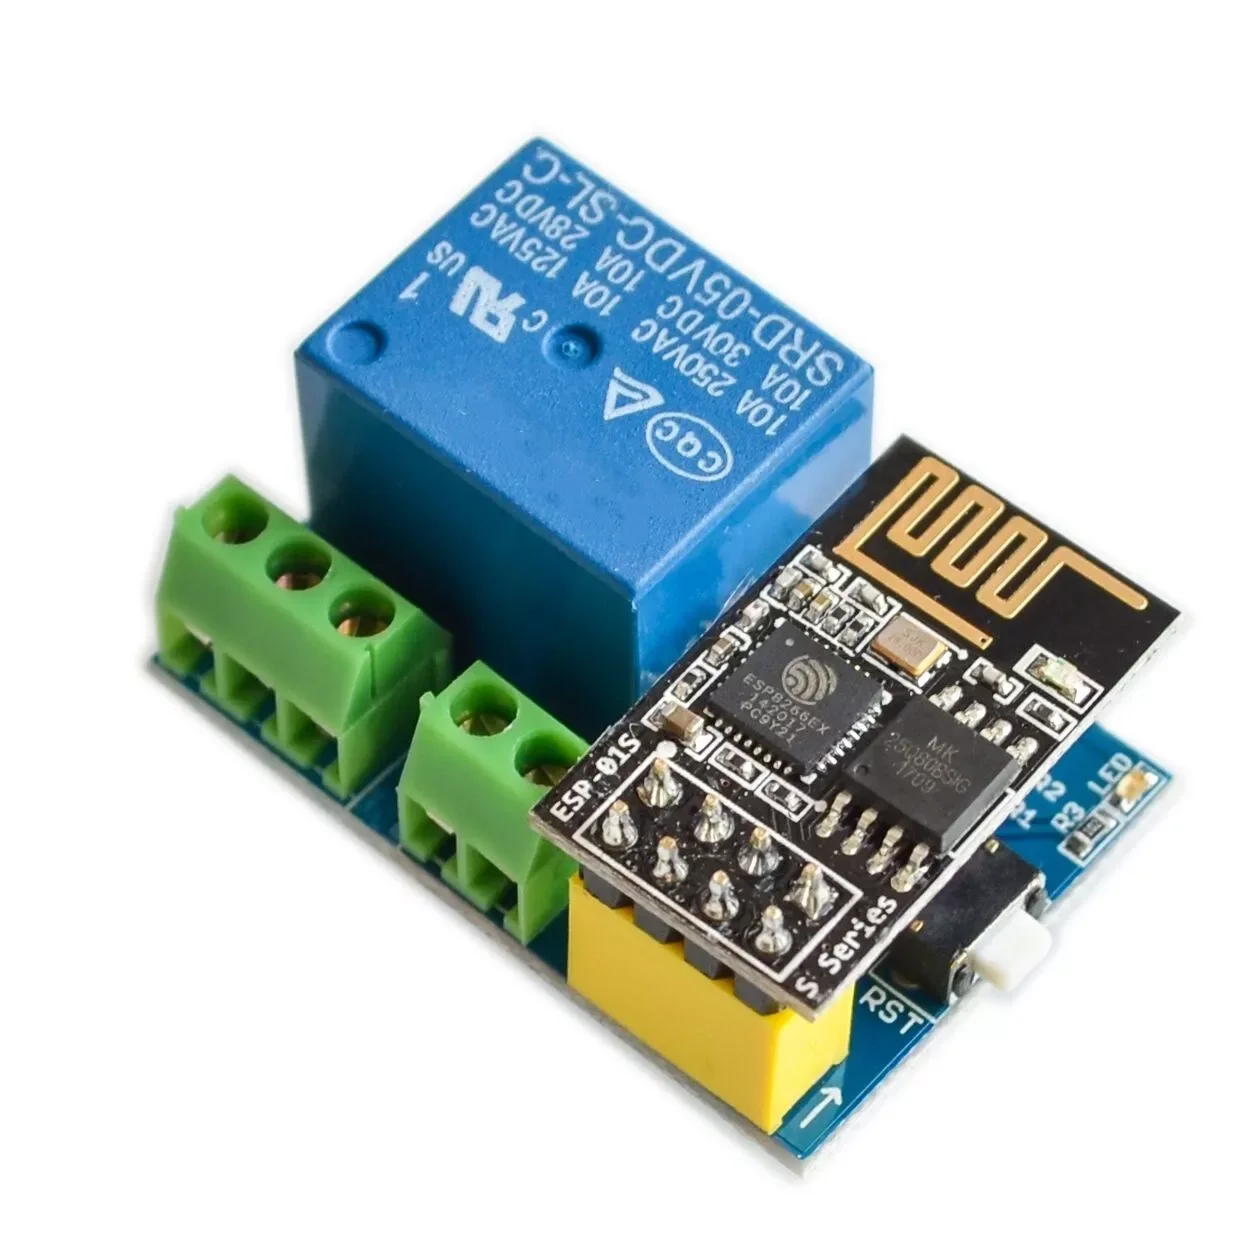 

【AH ROBOT】ESP8266 5V WiFi Relay Module Things Smart Home Remote Control Switch Phone APP ESP-01